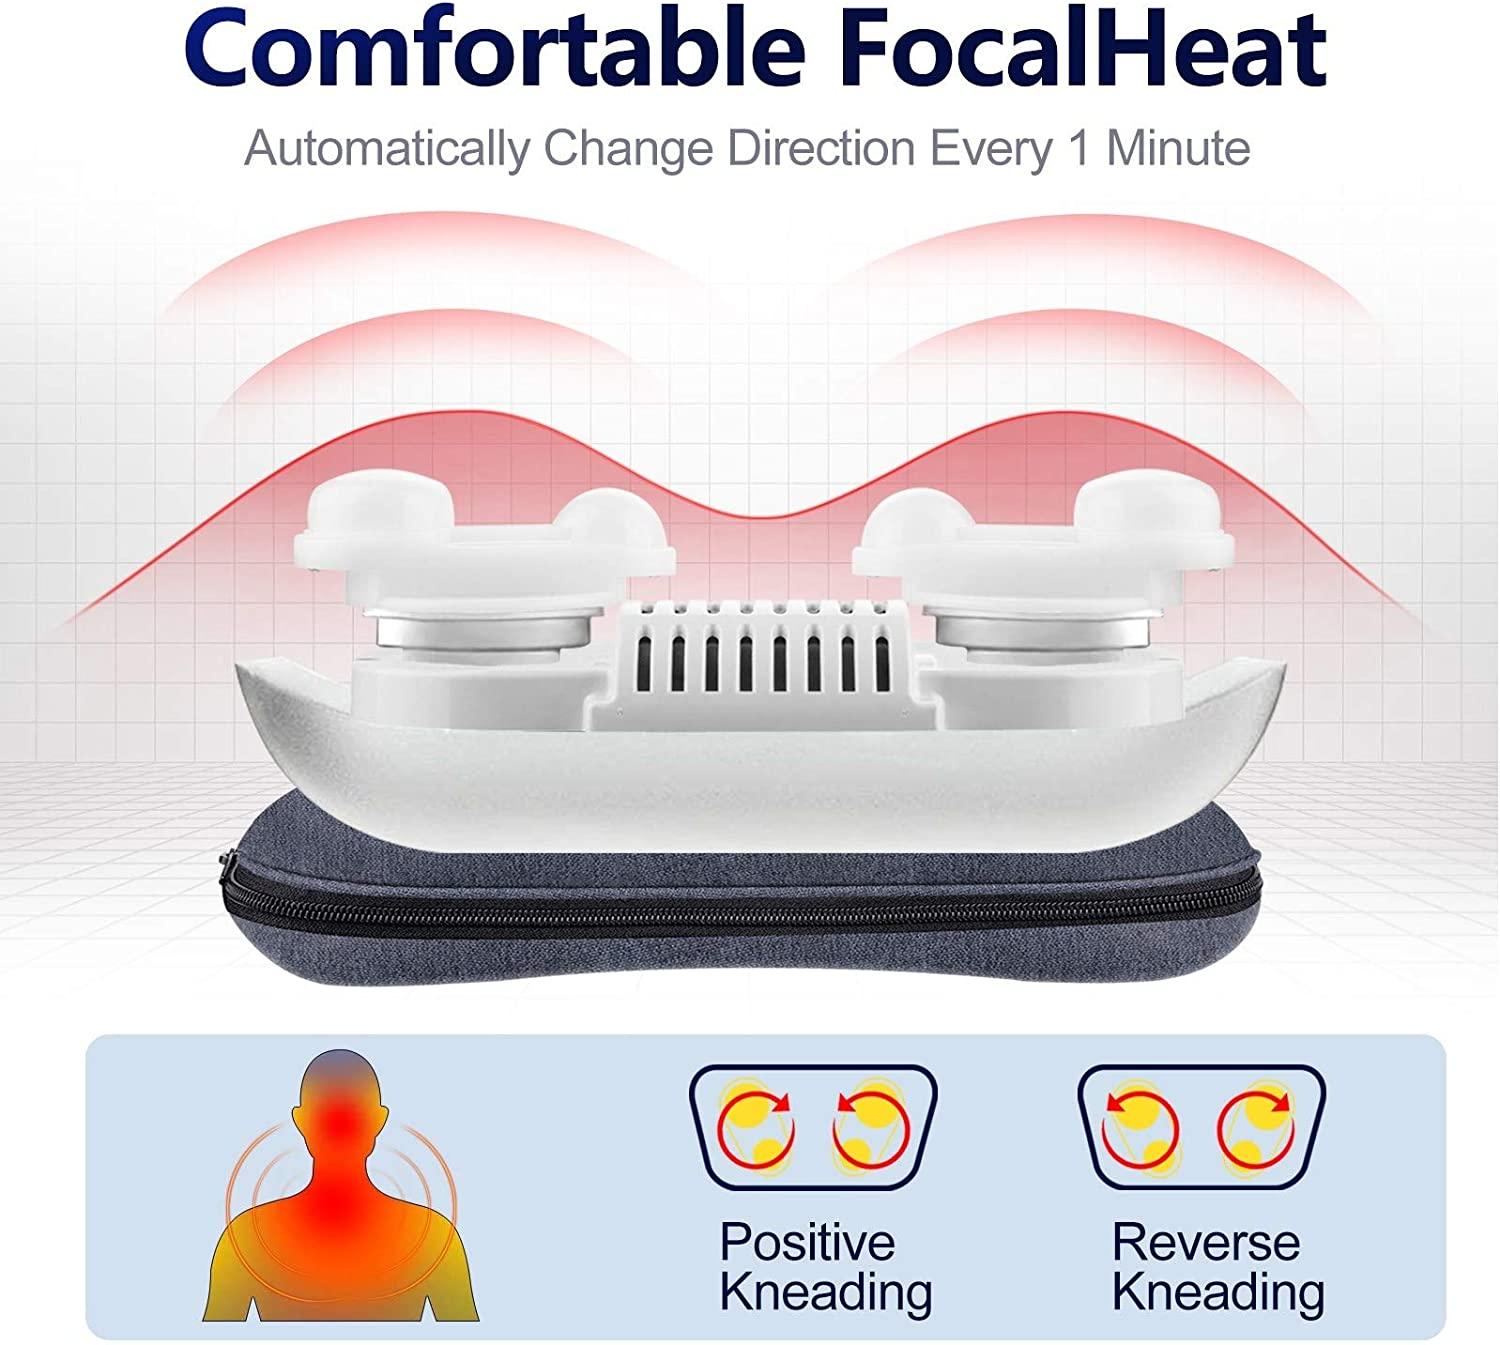 MoCuishle Neck and Back shiatsu massager pillow with heat, new in box.